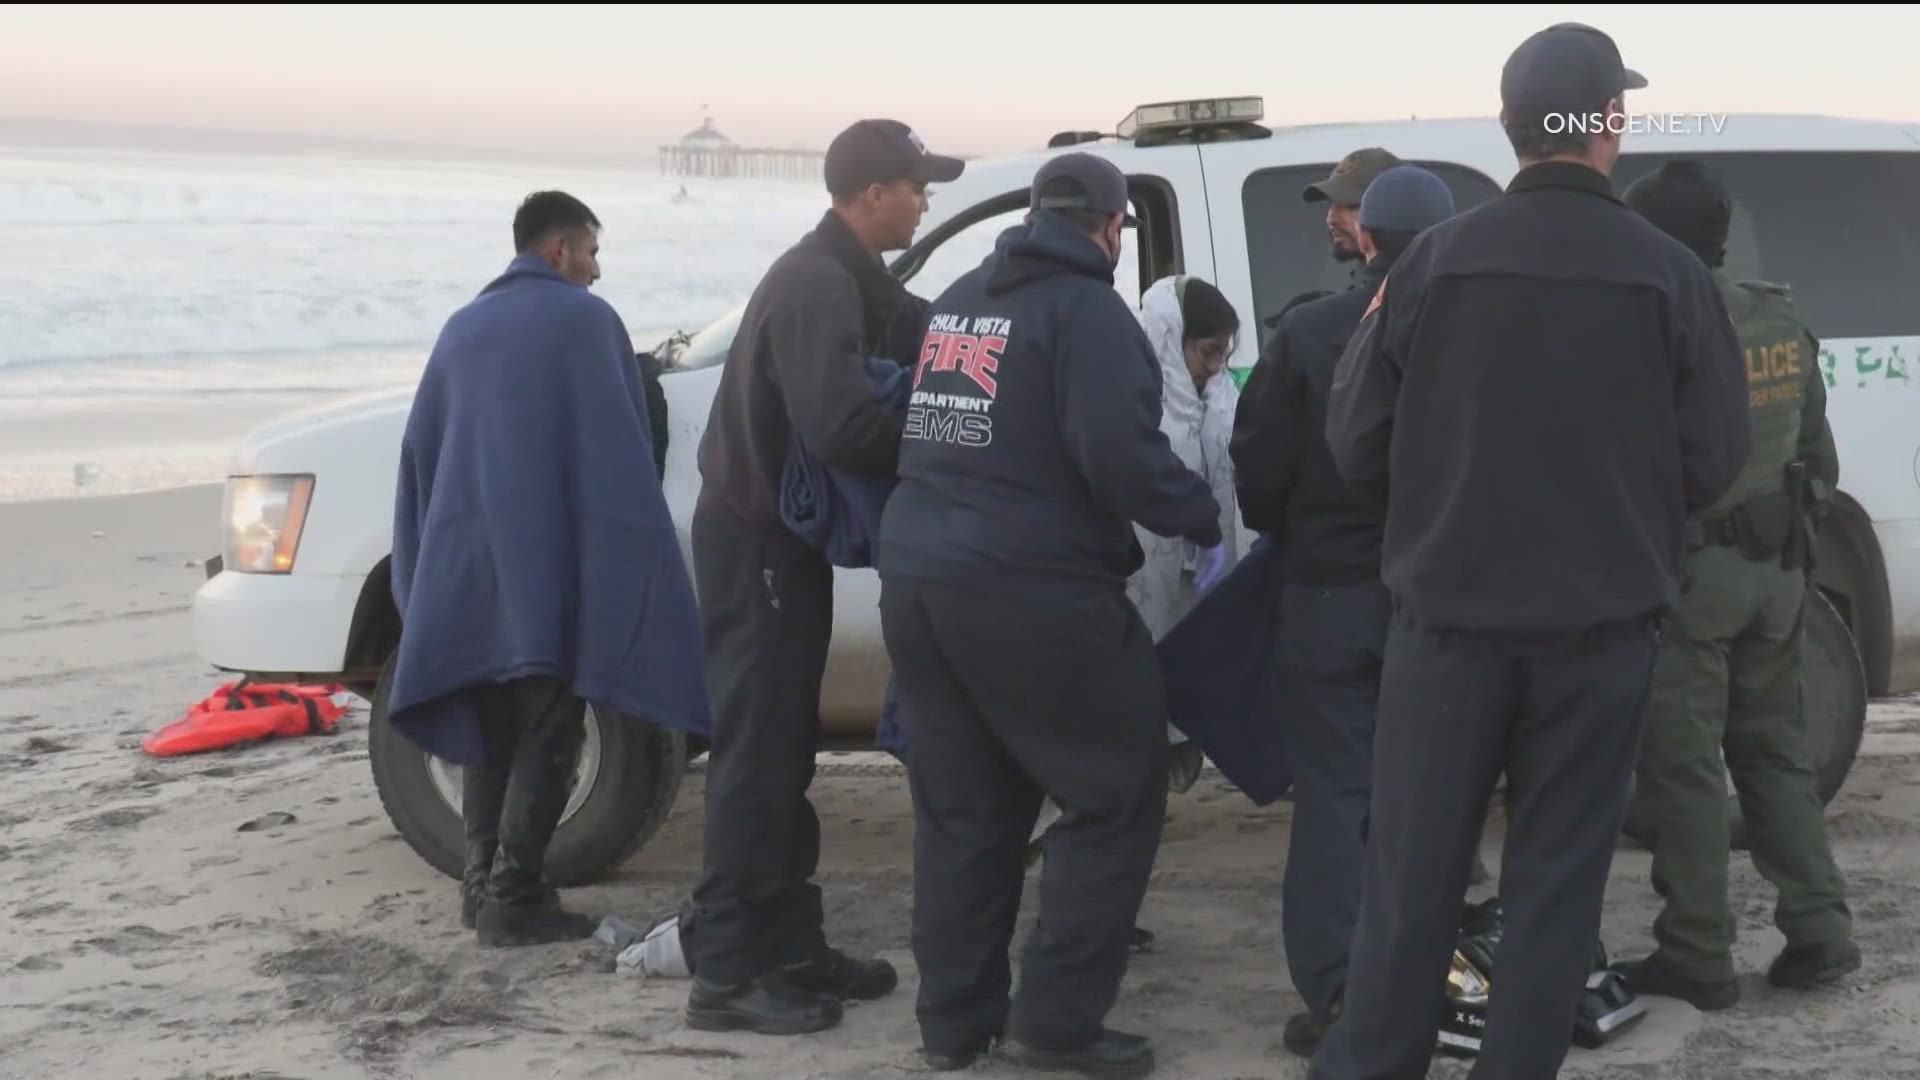 Seven people were rescued, and at least two people died after the small boat they were on capsized off the coast of Imperial Beach.